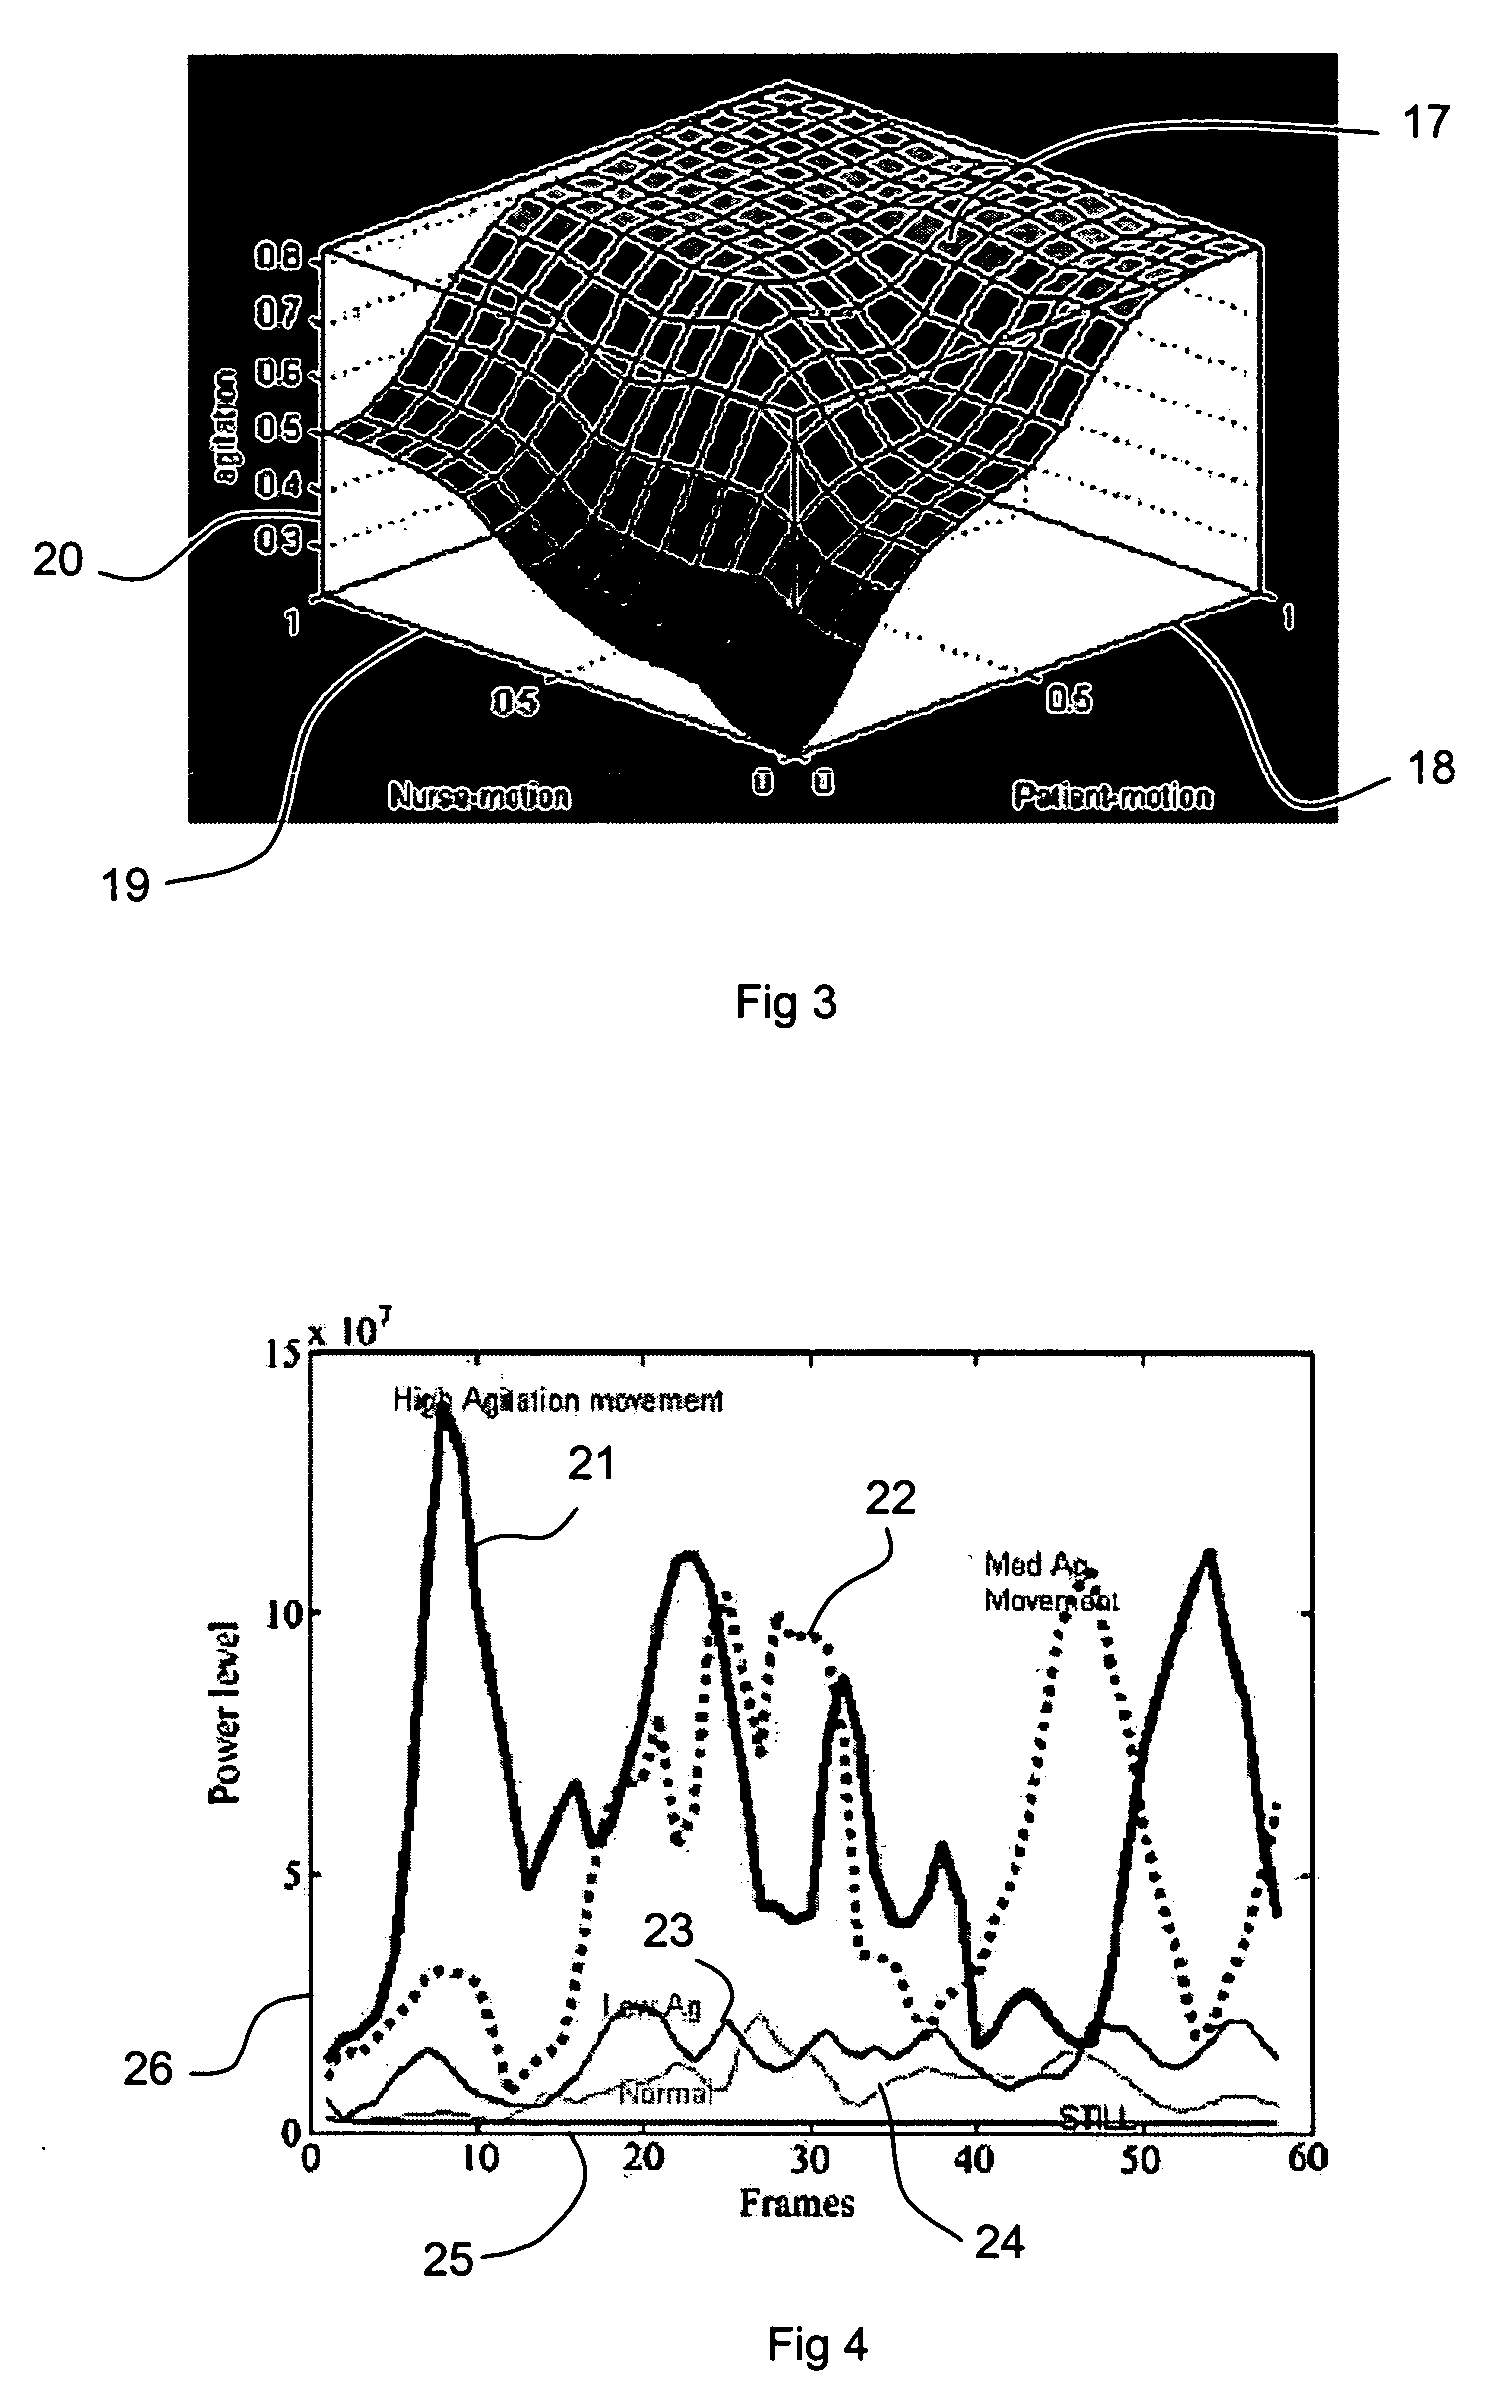 Method and system for assaying agitation